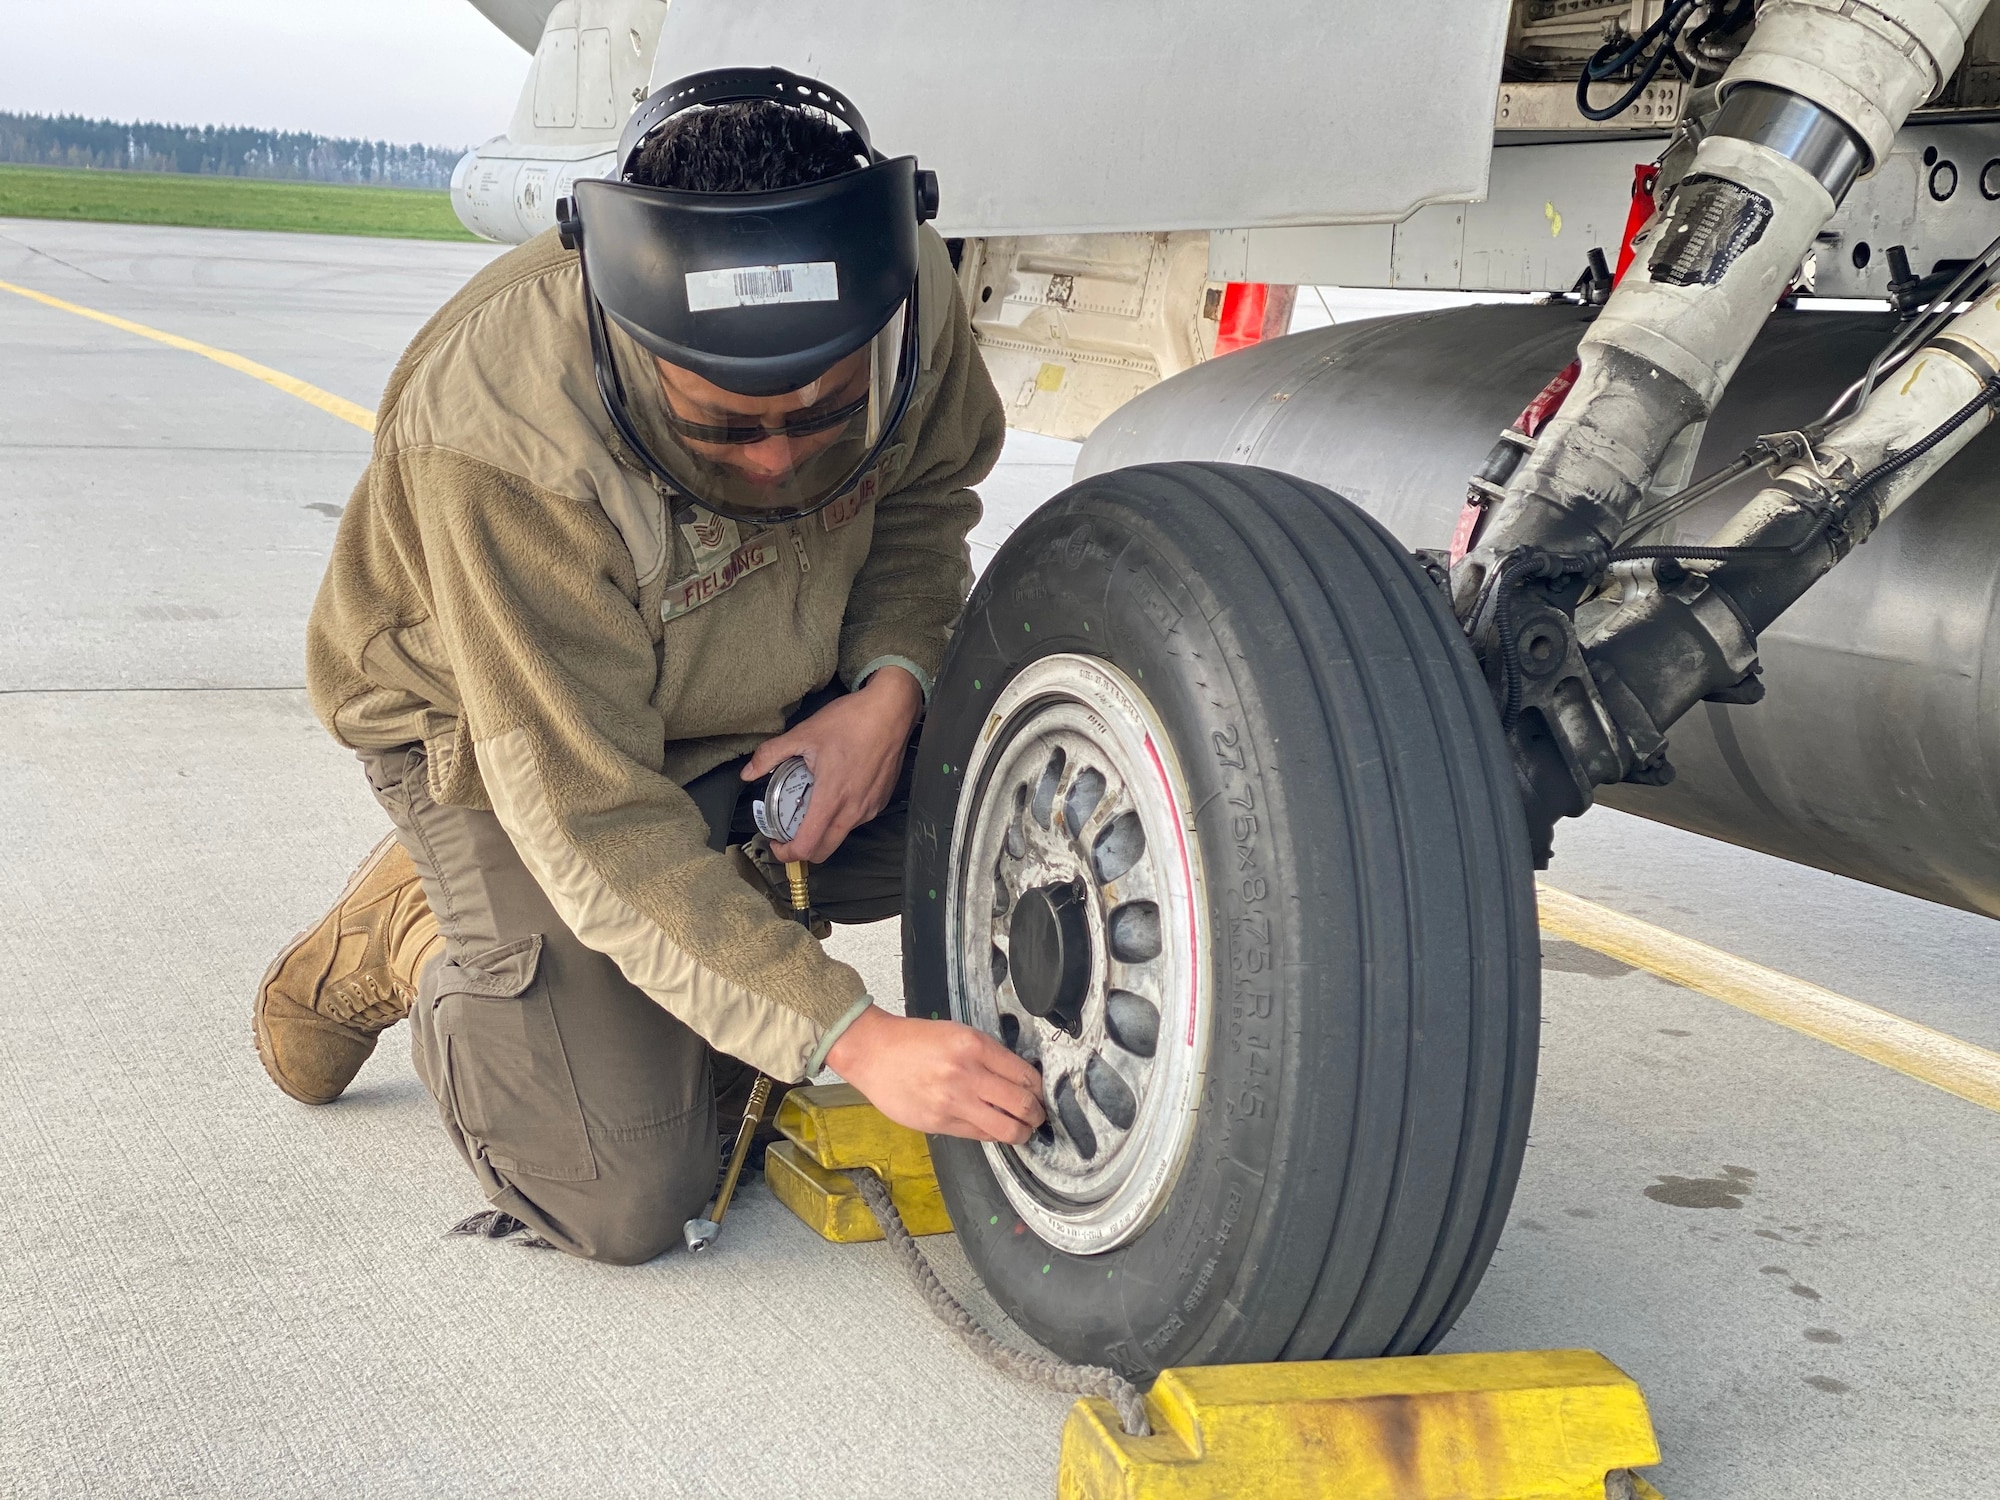 U.S. Air Force Tech. Sgt. Shaun Fielding, 52nd Aircraft Maintenance Squadron Weapons Load Crew chief, checks the tire pressure on a U.S. Air Force F-16 Fighting Falcon at an Agile Combat Employment exercise at Łask Air Base, Poland, April 21, 2021.